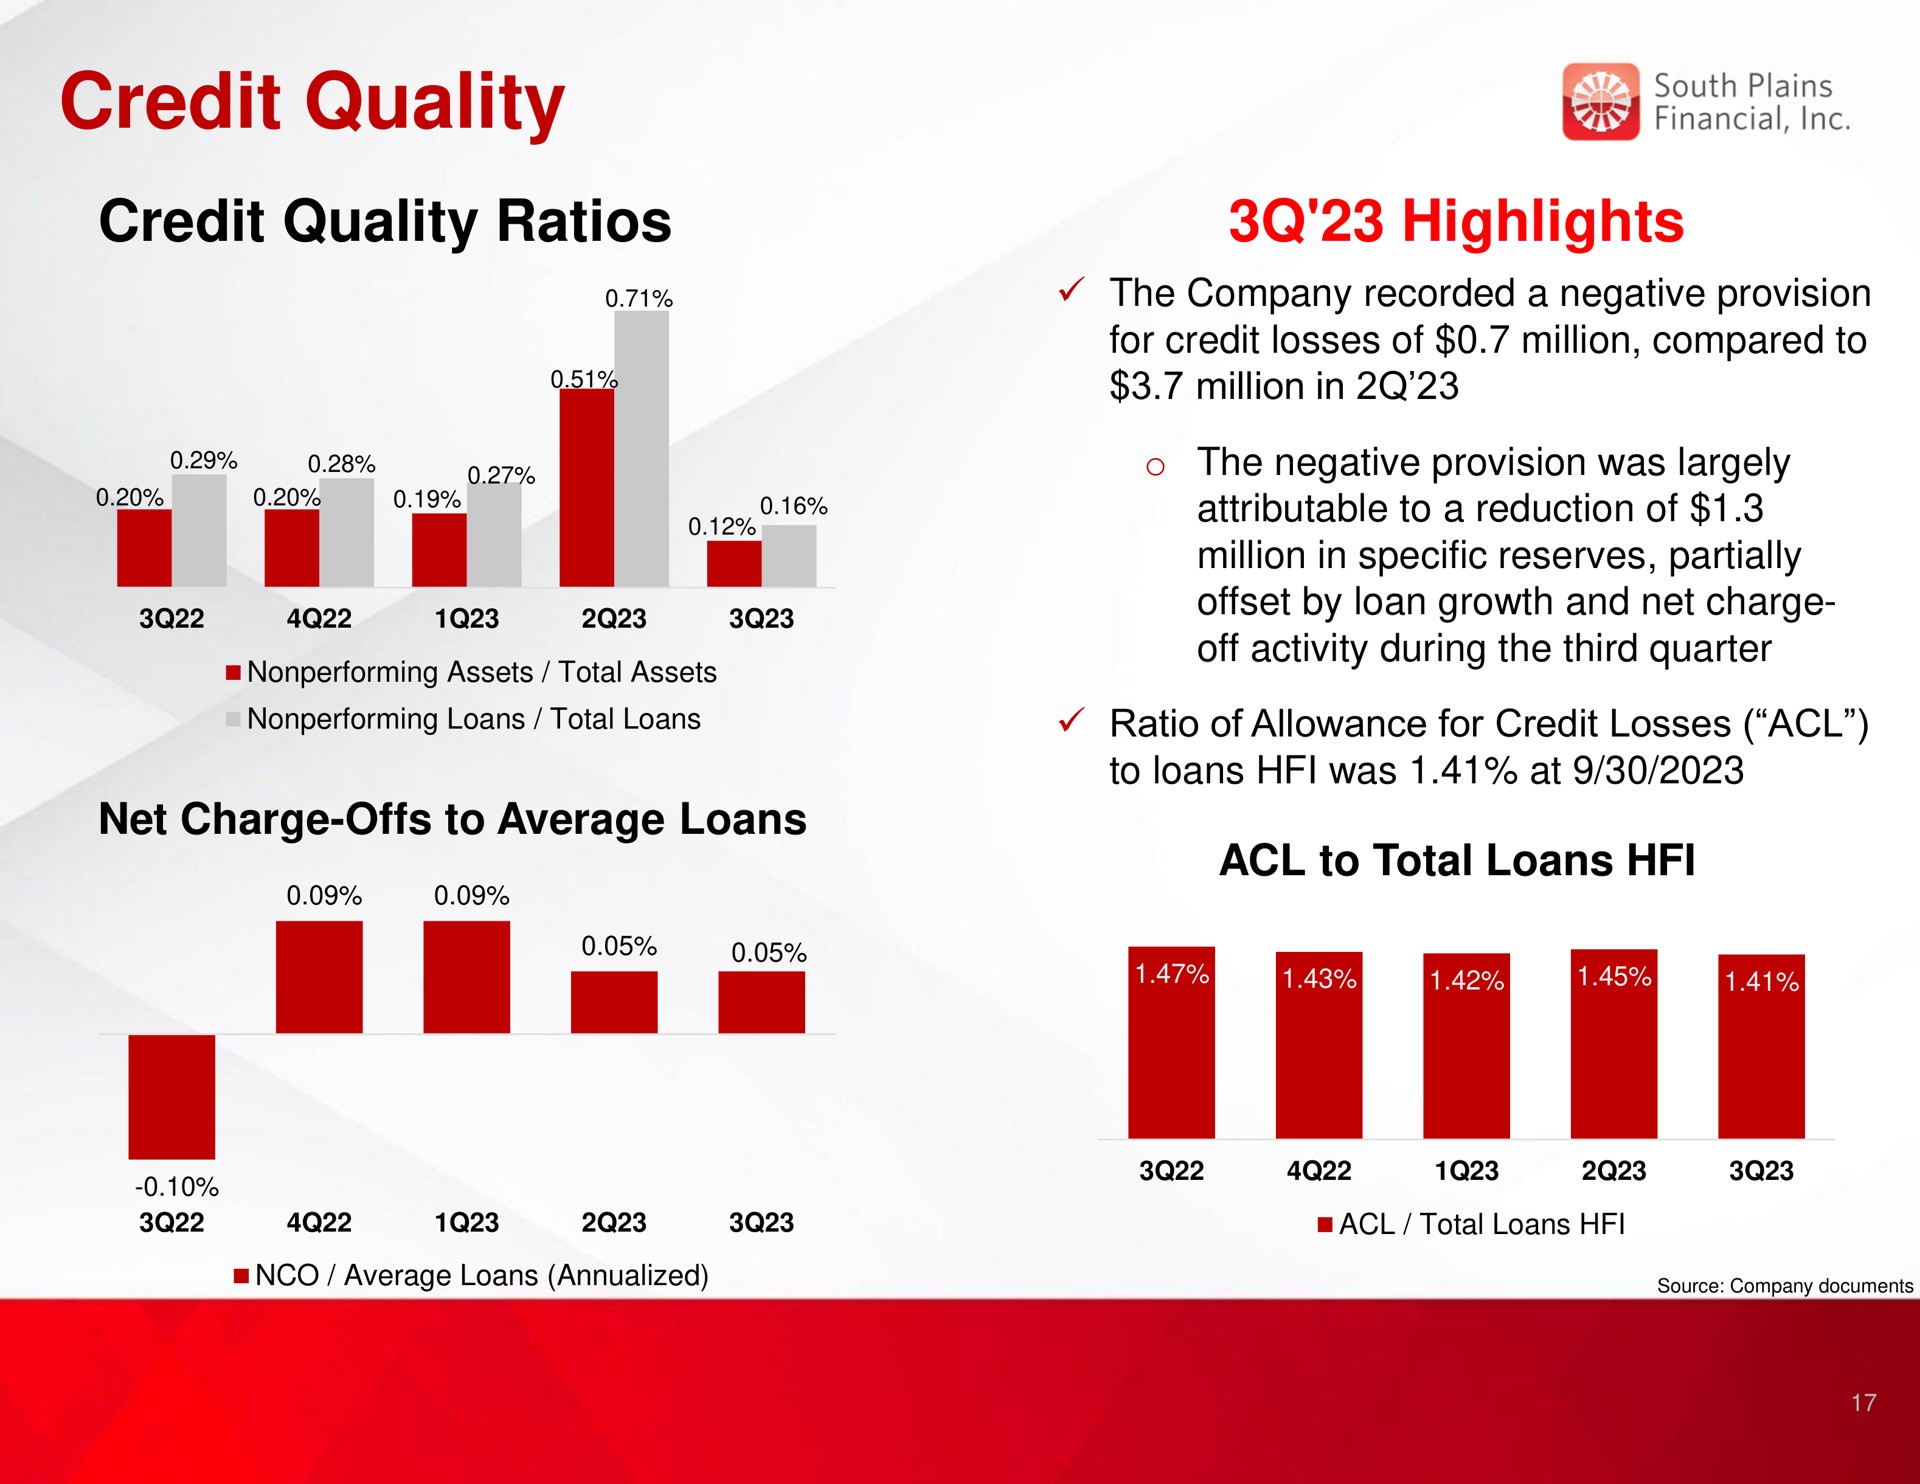 credit quality credit quality ratios highlights | South Plains Financial